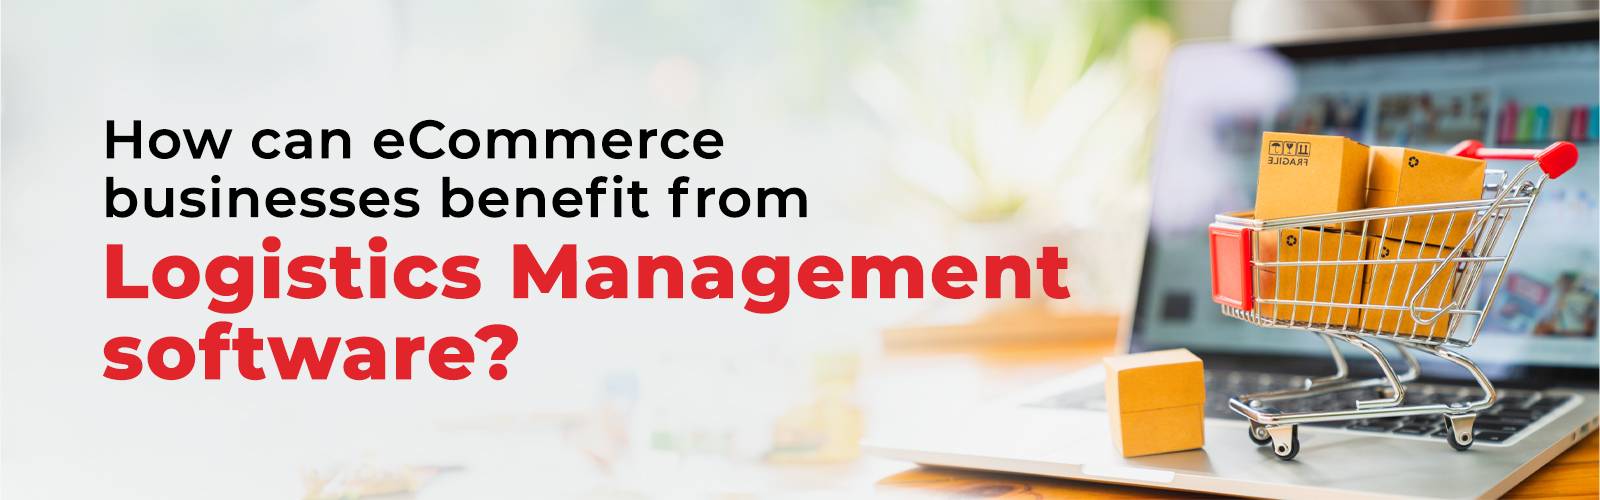 How can eCommerce business benefit from Logistics Management Software